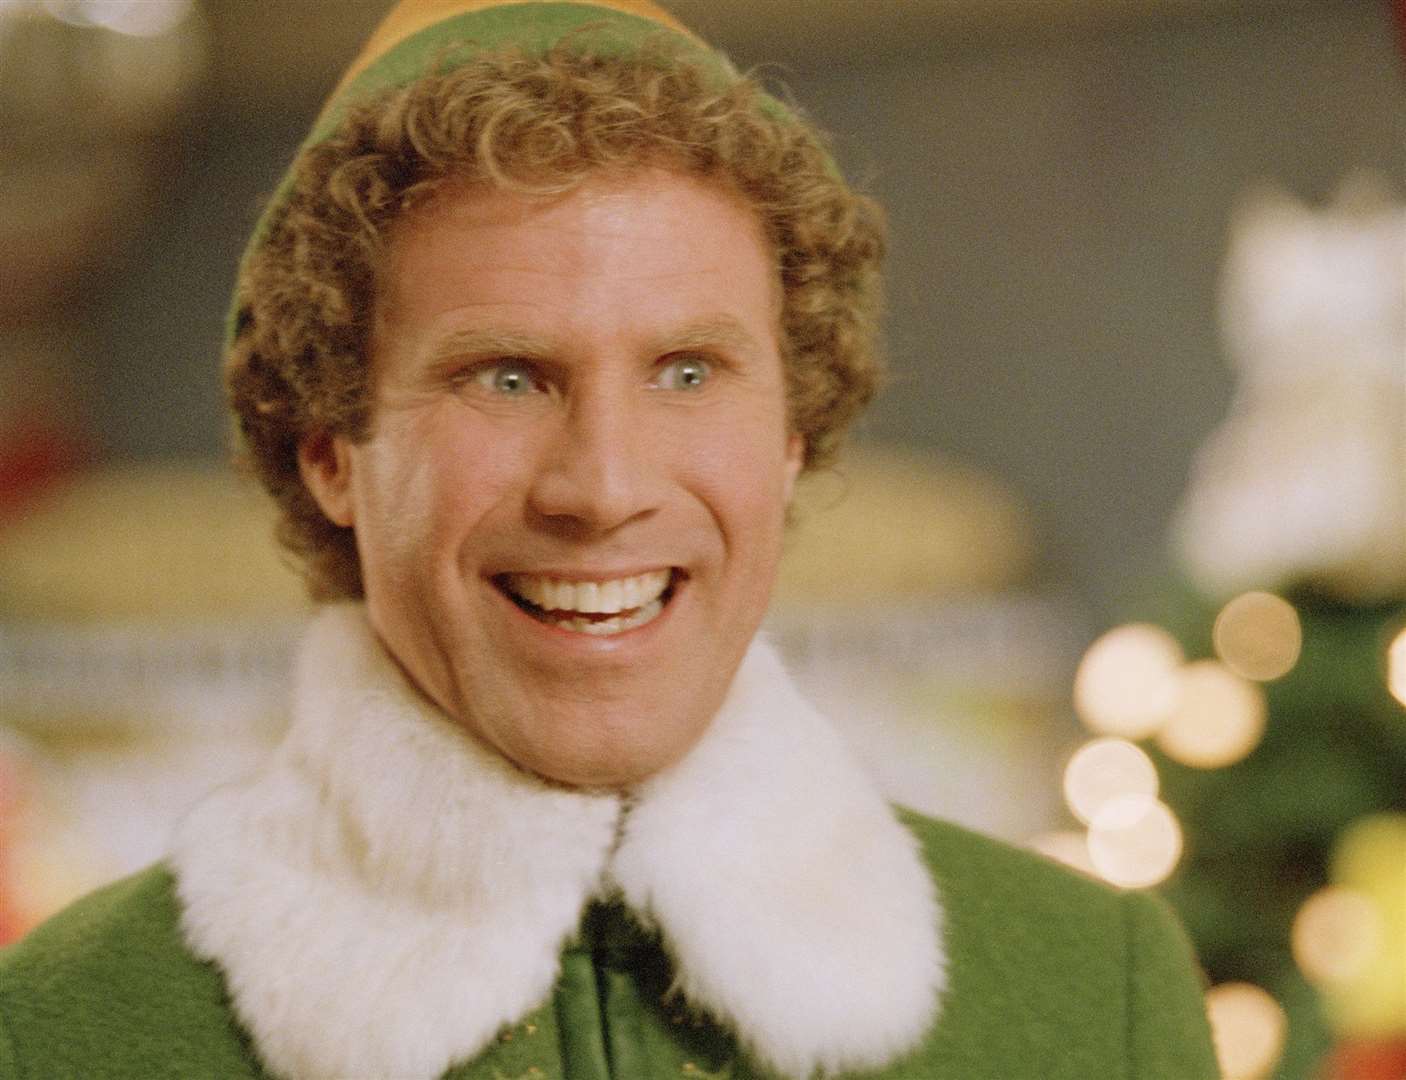 Can you recall the saddest and happiest moments from Elf?